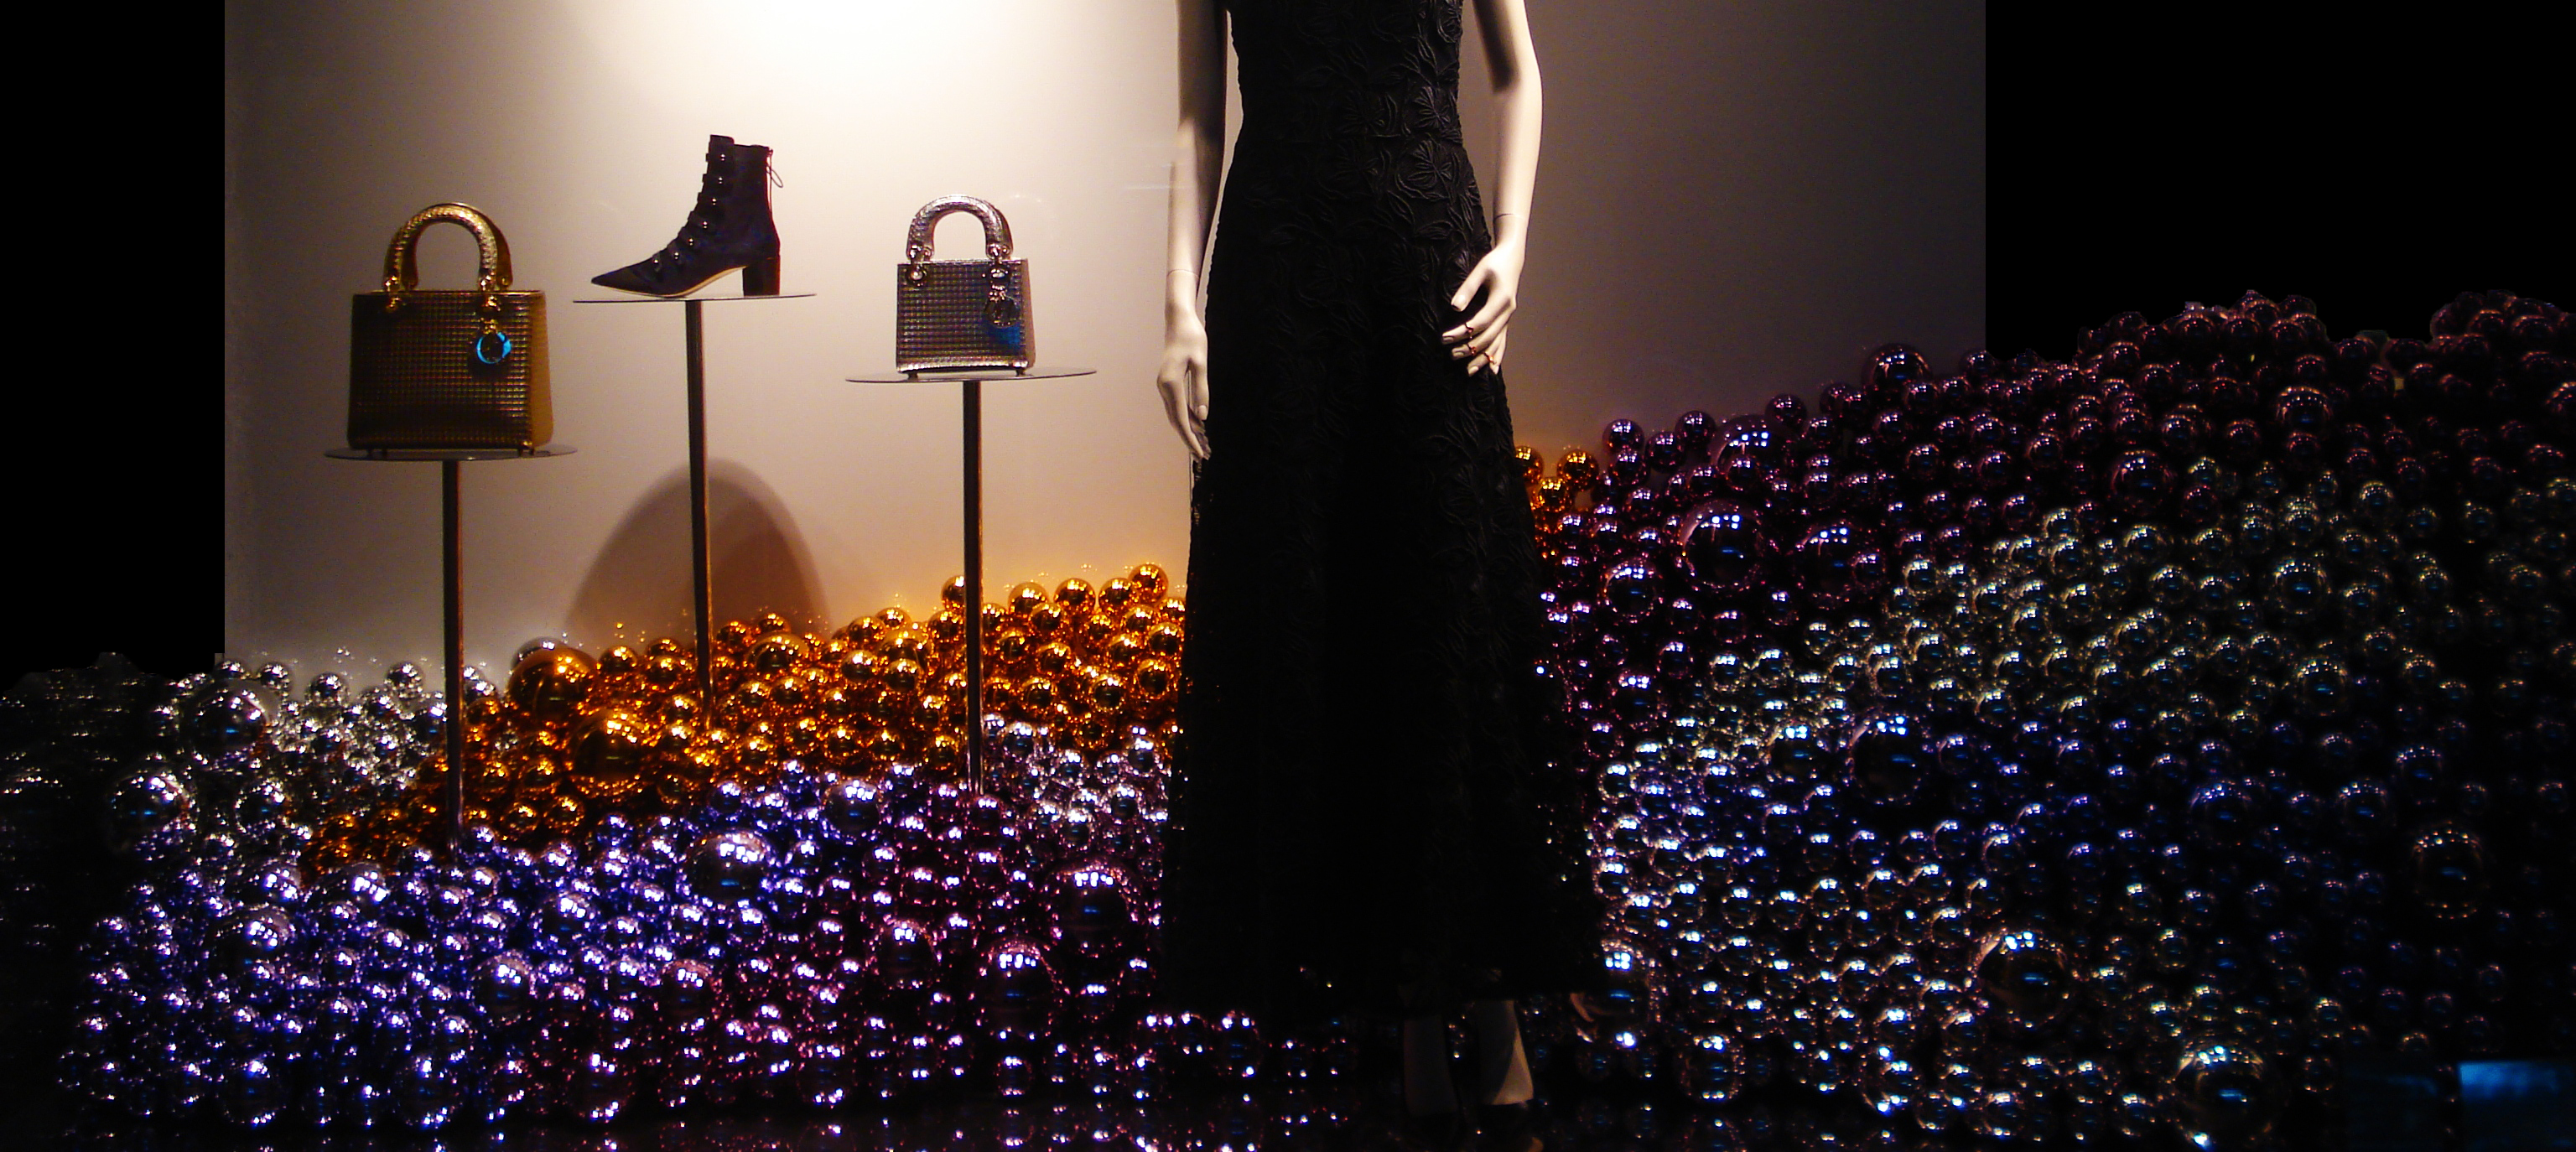 Another love for christmas balls - Dior windows, Athens